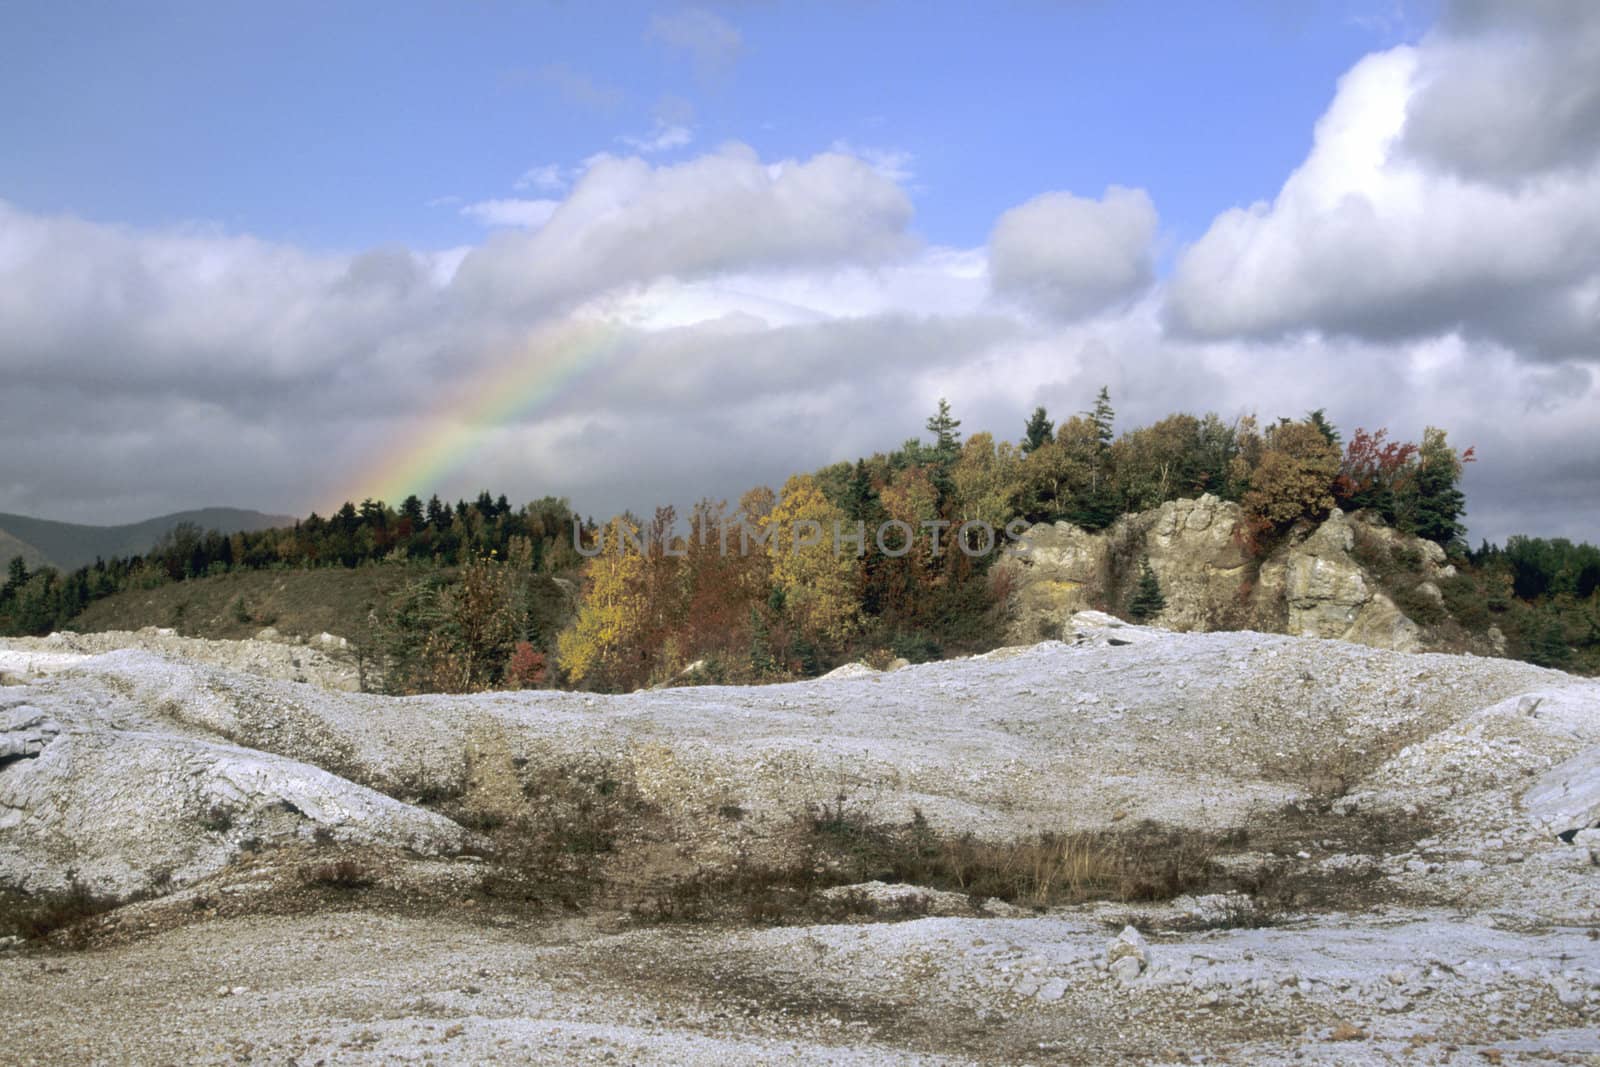 Rainbow over the Mine by ACMPhoto